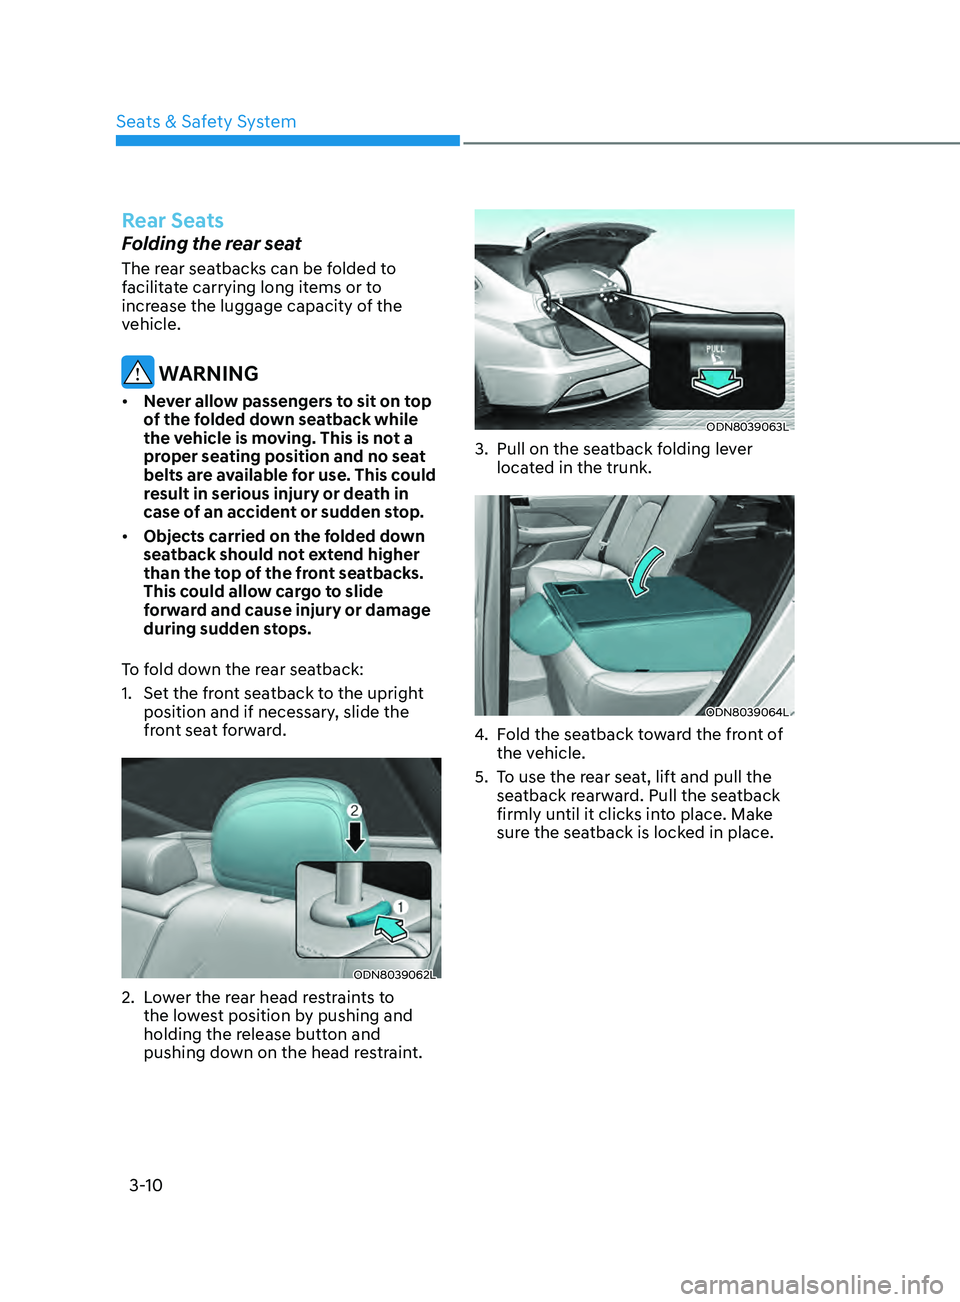 HYUNDAI SONATA LIMITED 2021  Owners Manual 3-10
Rear Seats
Folding the rear seat
The rear seatbacks can be folded to 
facilitate carrying long items or to 
increase the luggage capacity of the 
vehicle.
 WARNING
•	Never allow passengers to s